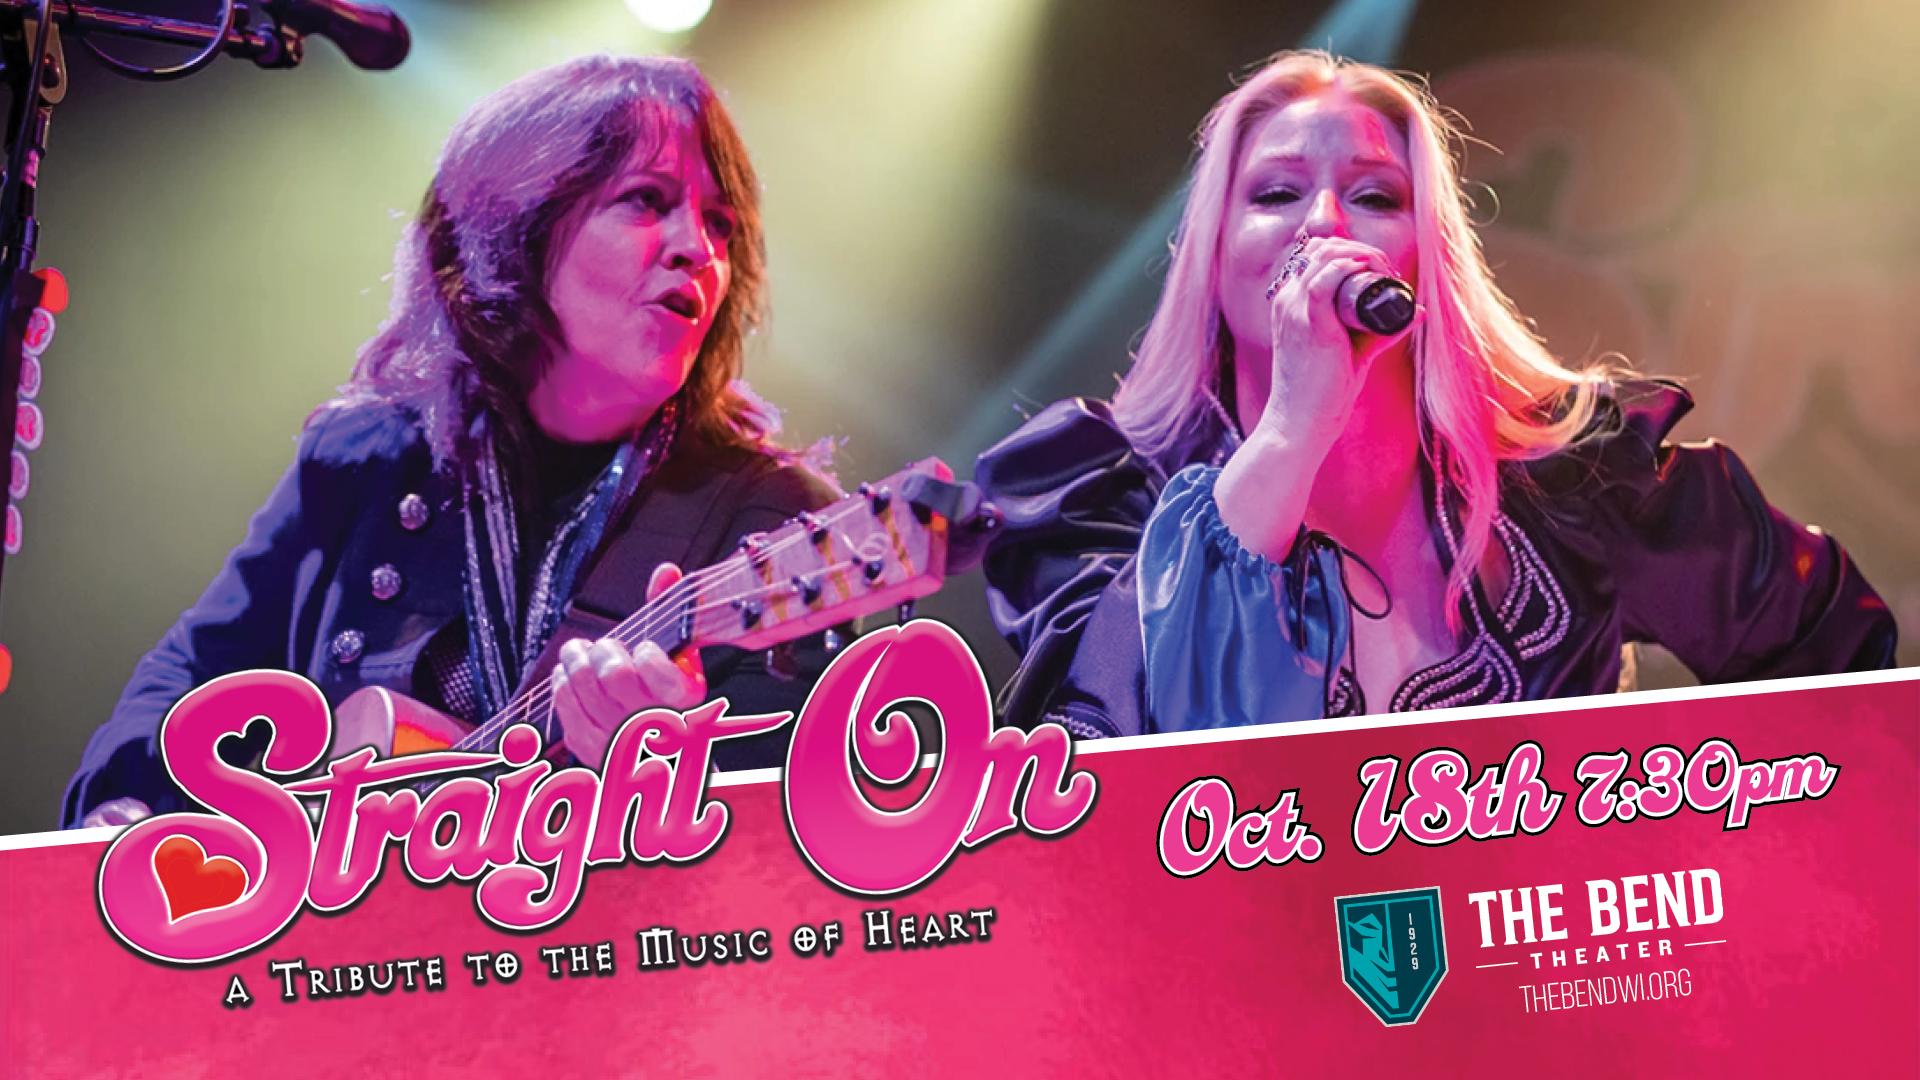 Straight On: A Tribute to the Music of HEART